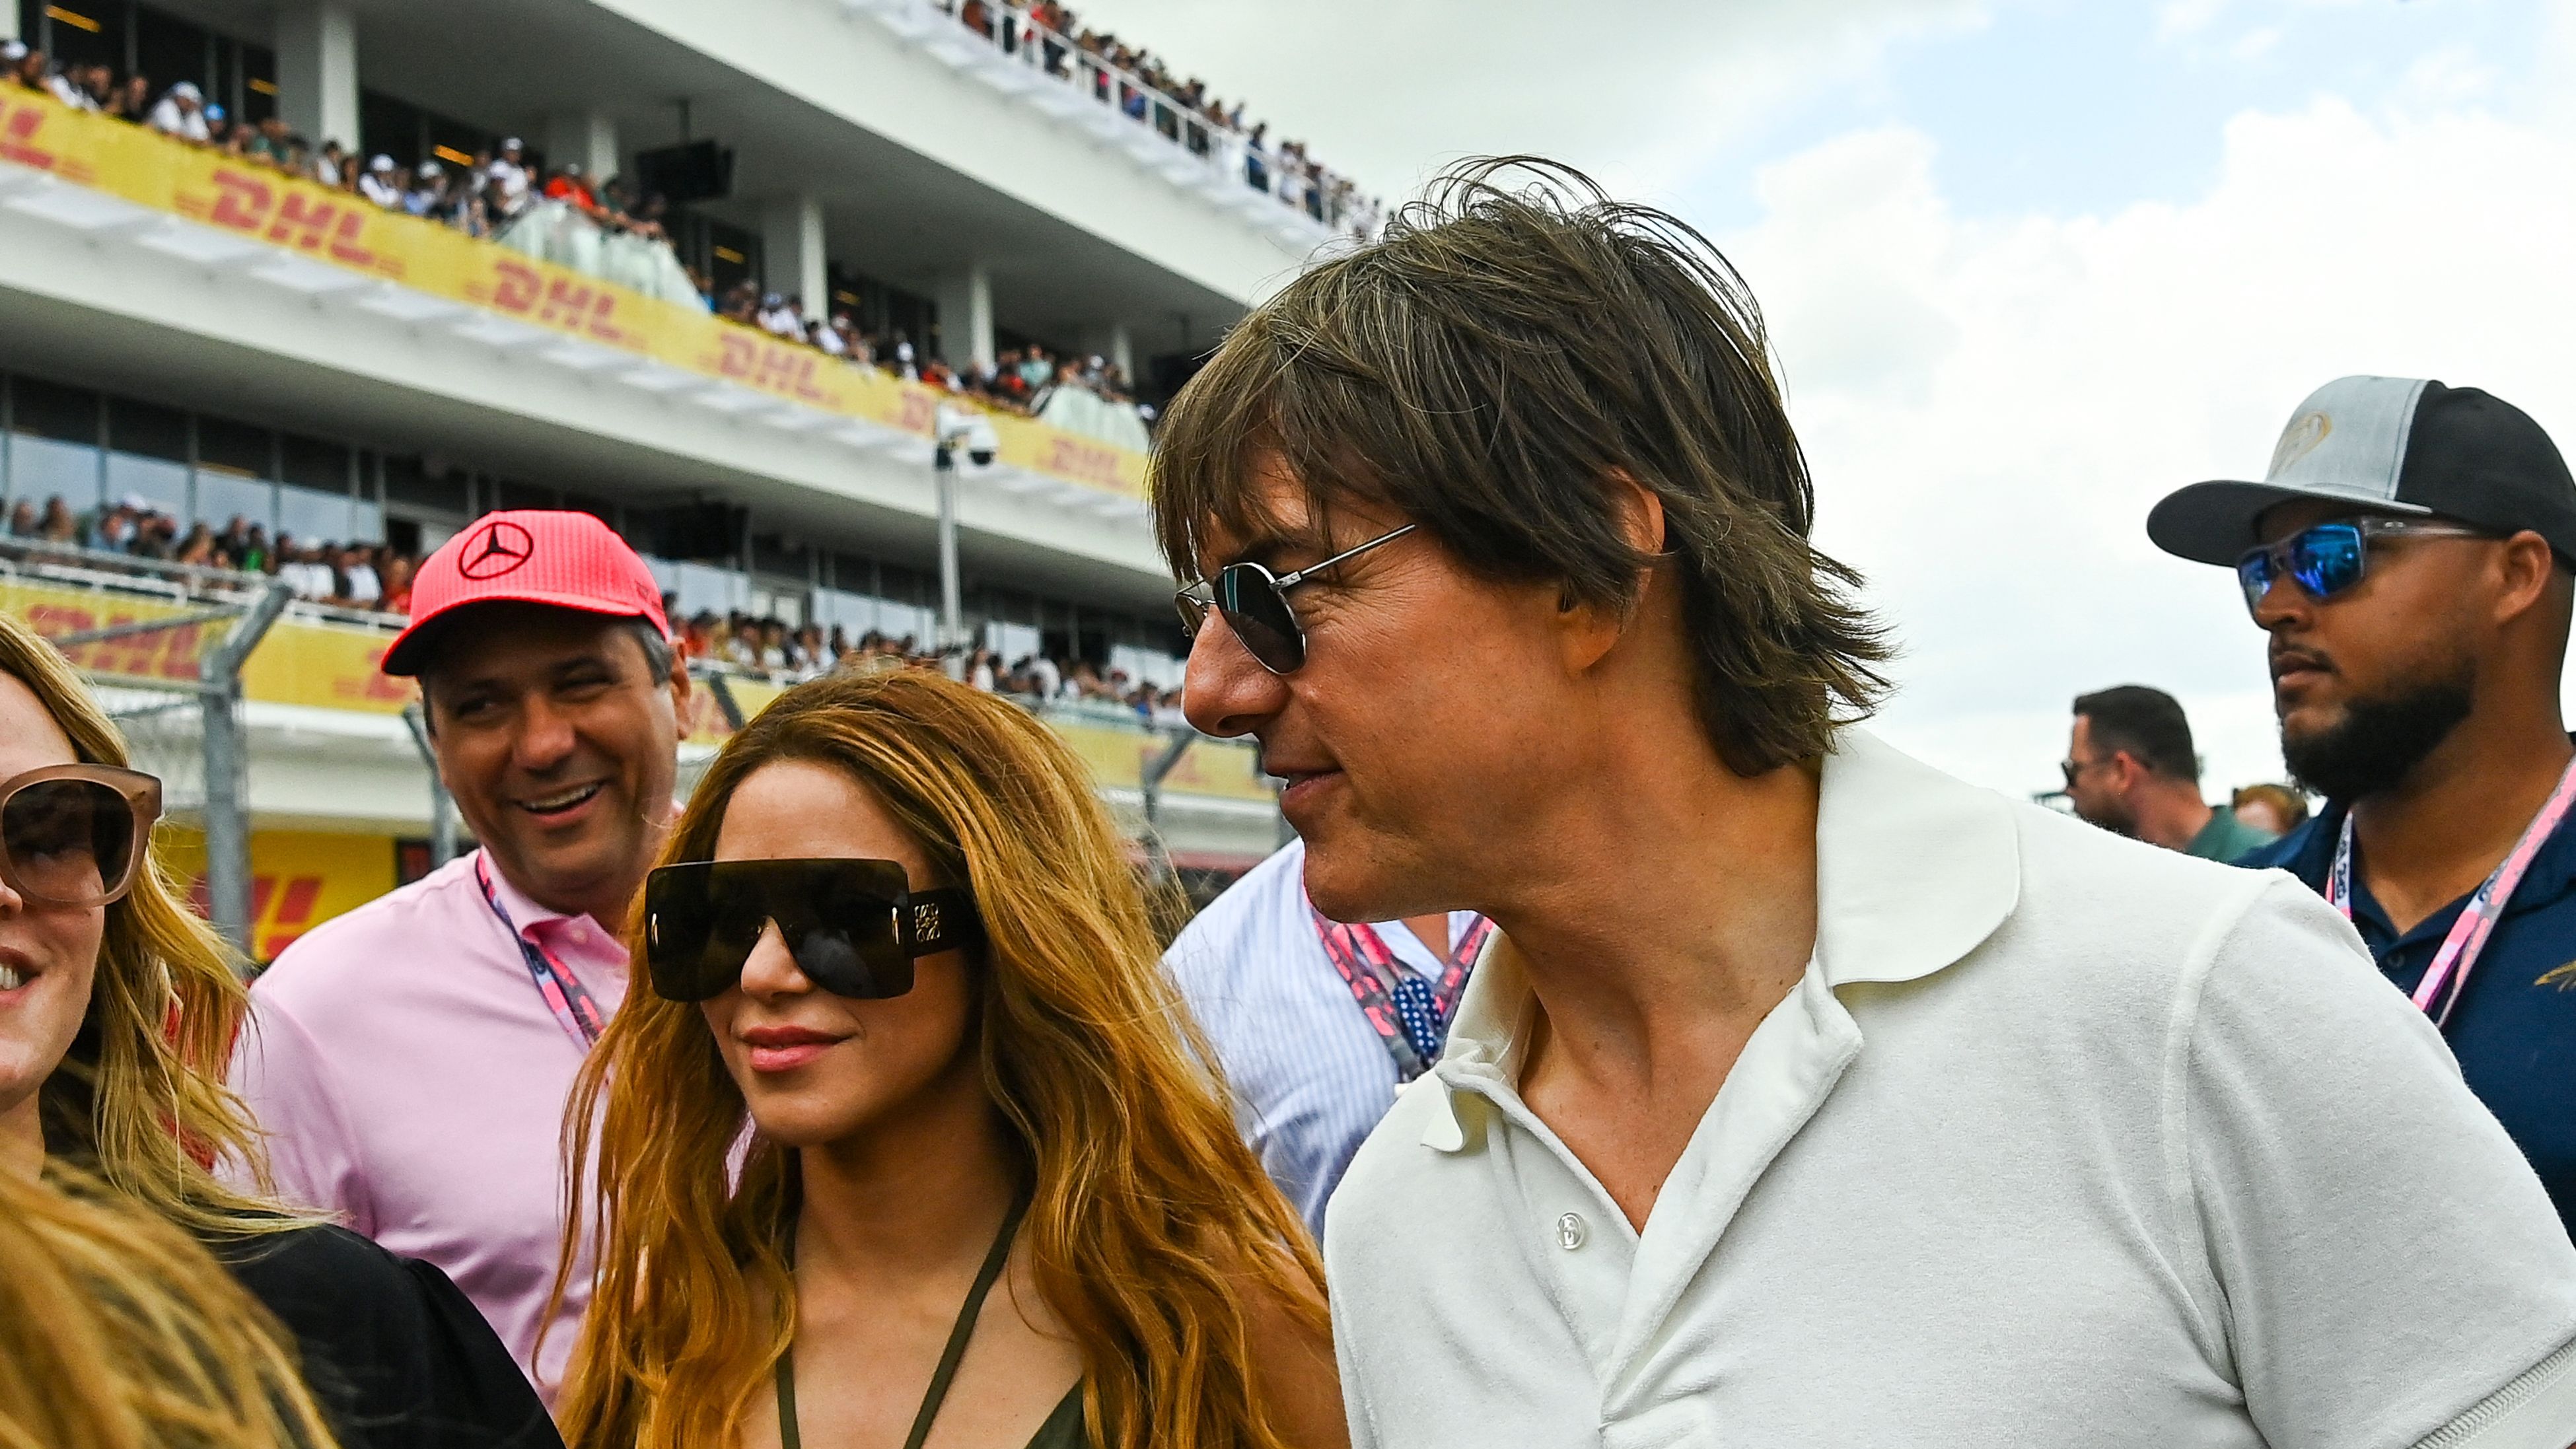 Shakira and Tom Cruise Seen Together at Miami Formula One Grand Prix